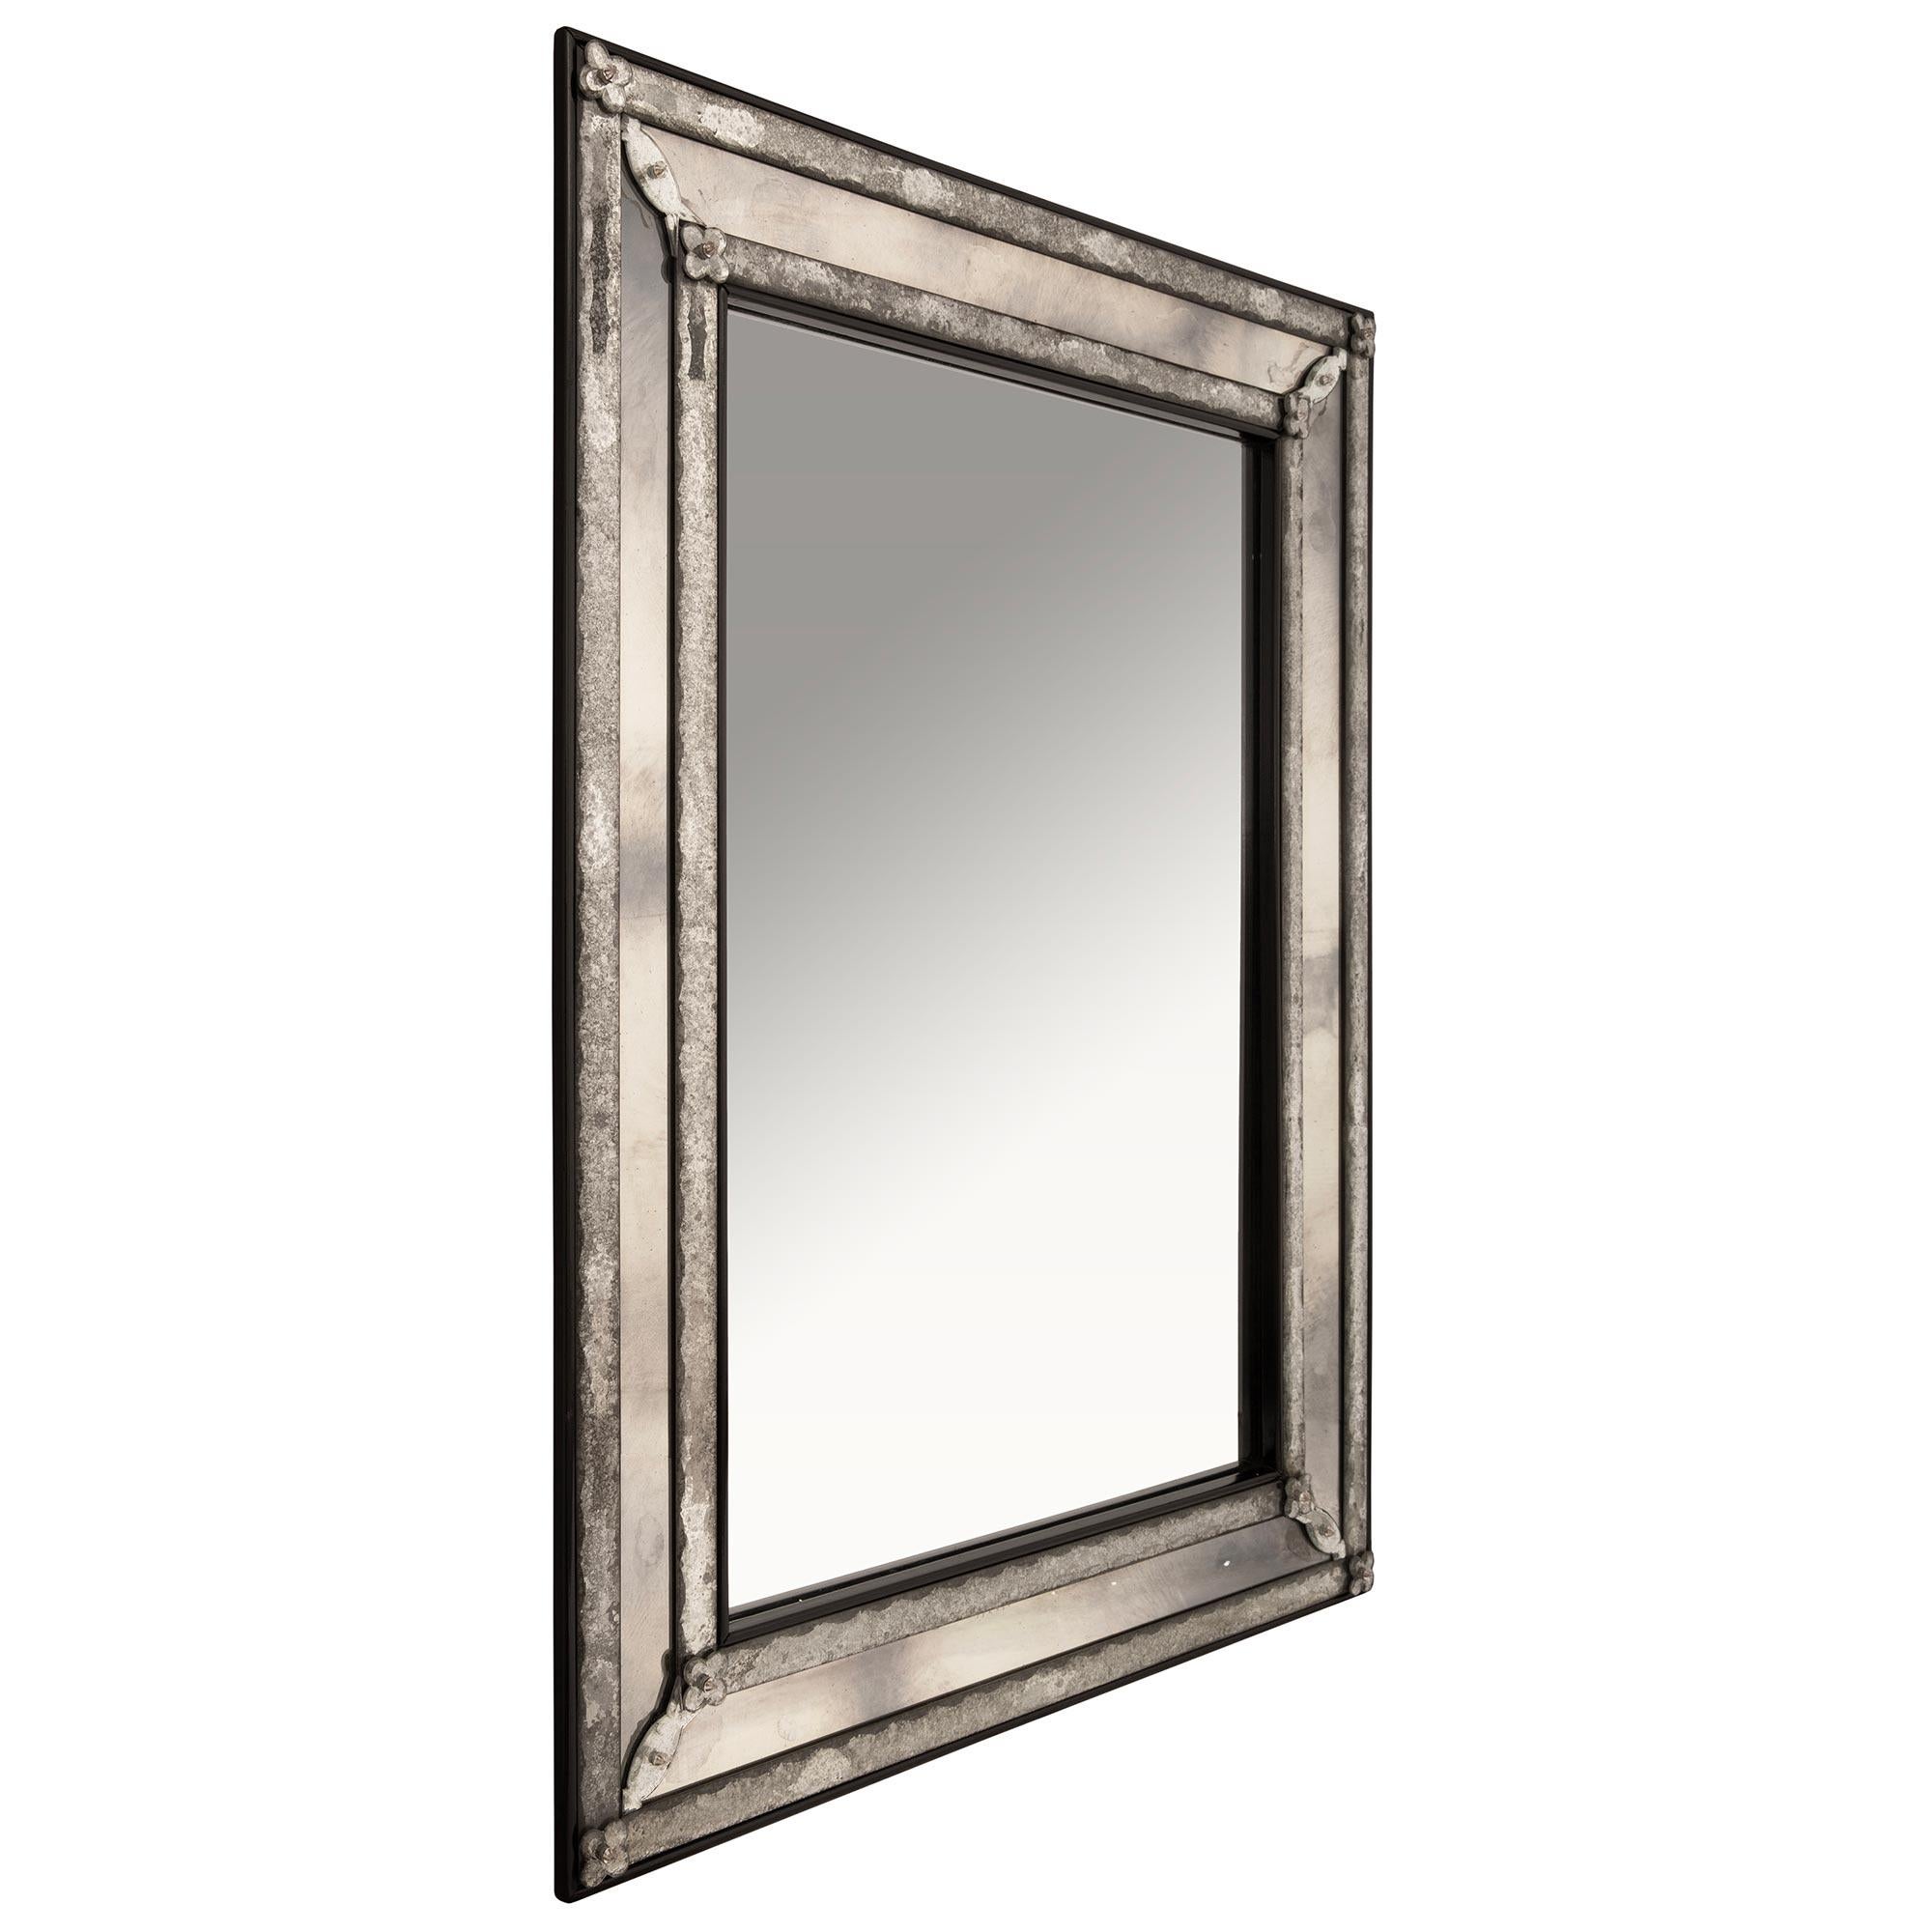 Italian 19th century Venetian st. mirror In Good Condition For Sale In West Palm Beach, FL